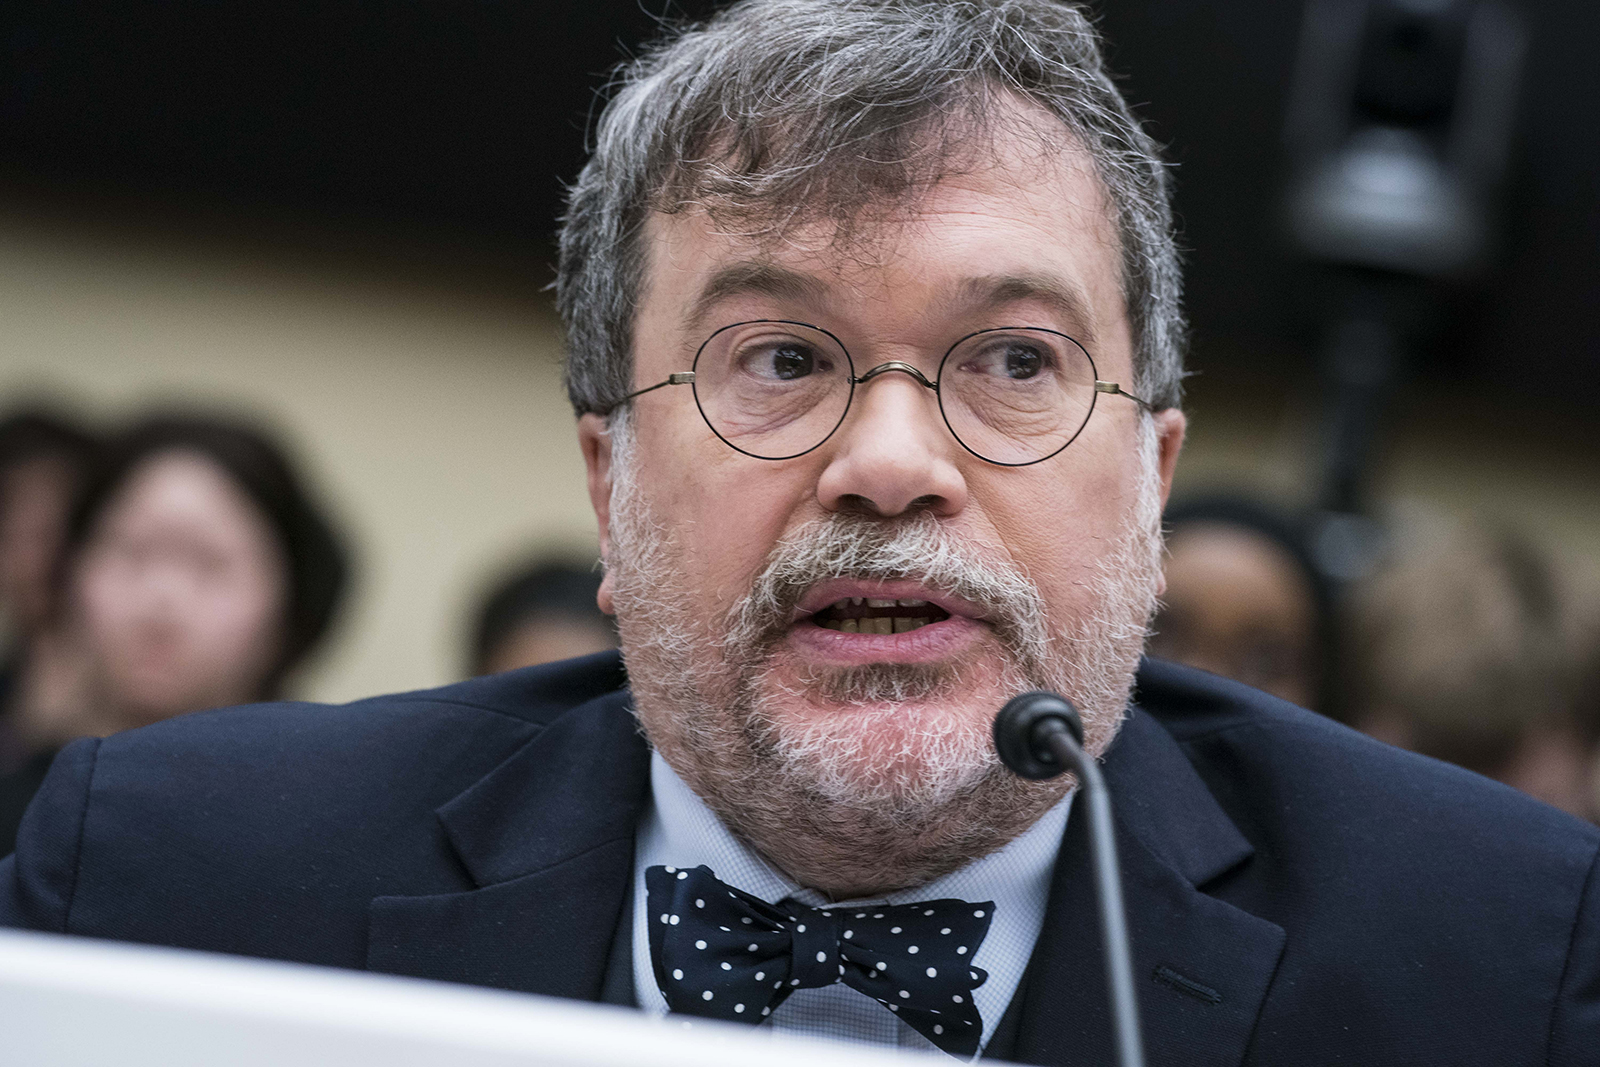 Dr. Peter Hotez, a virologist at Baylor College of Medicine, speaks during a House Science, Space and Technology Committee hearing in Washington, DC, on March 5, 2020. 